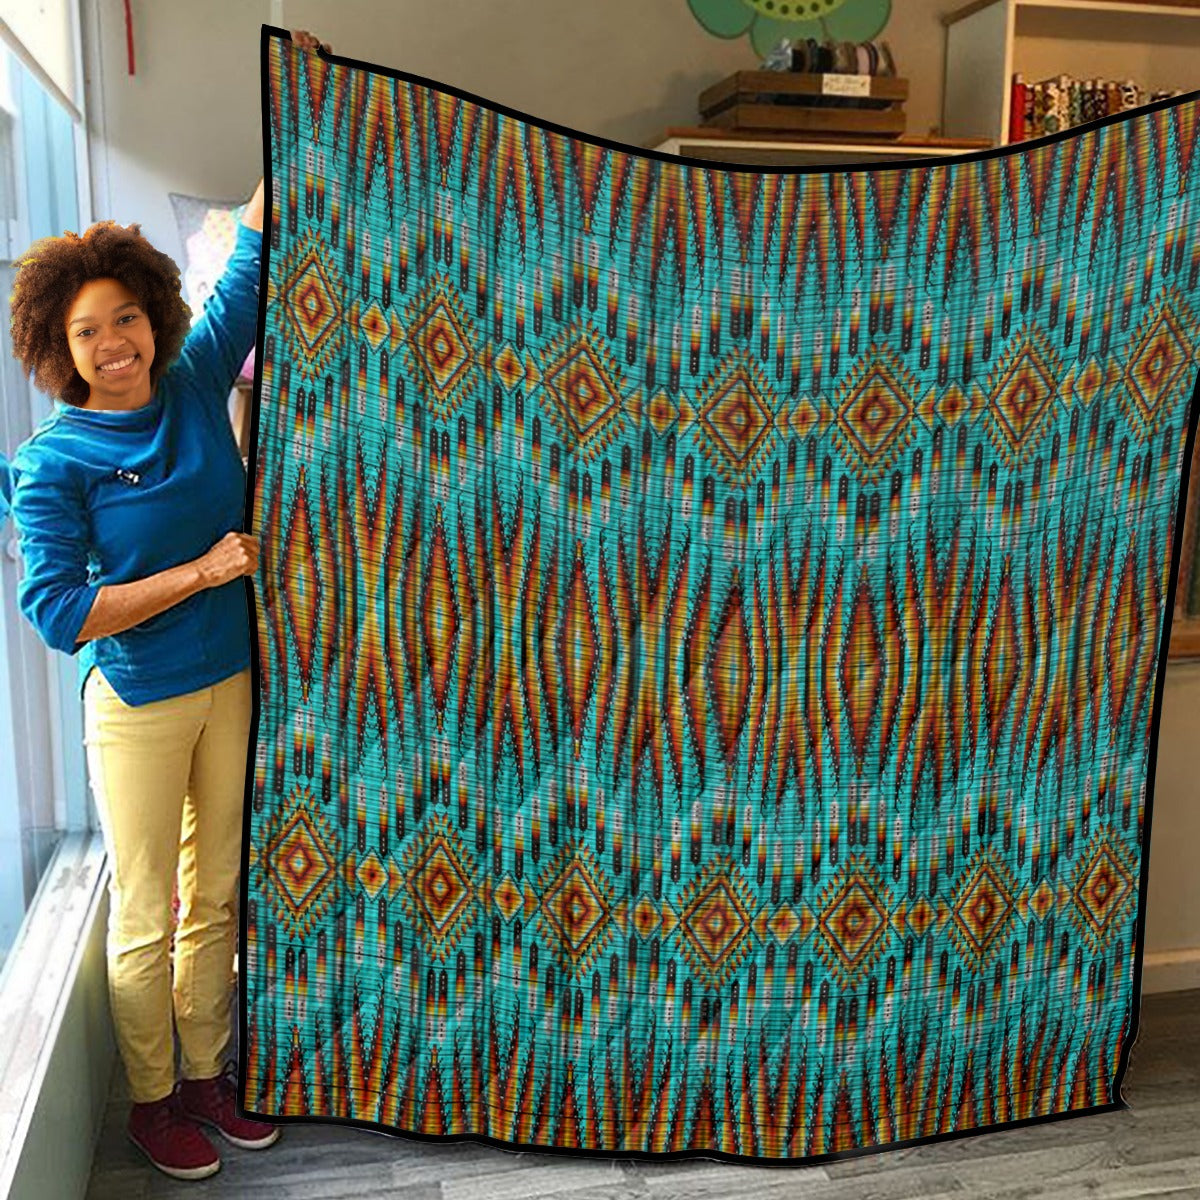 Fire Feather Turquoise Lightweight & Breathable Quilt With Edge-wrapping Strips